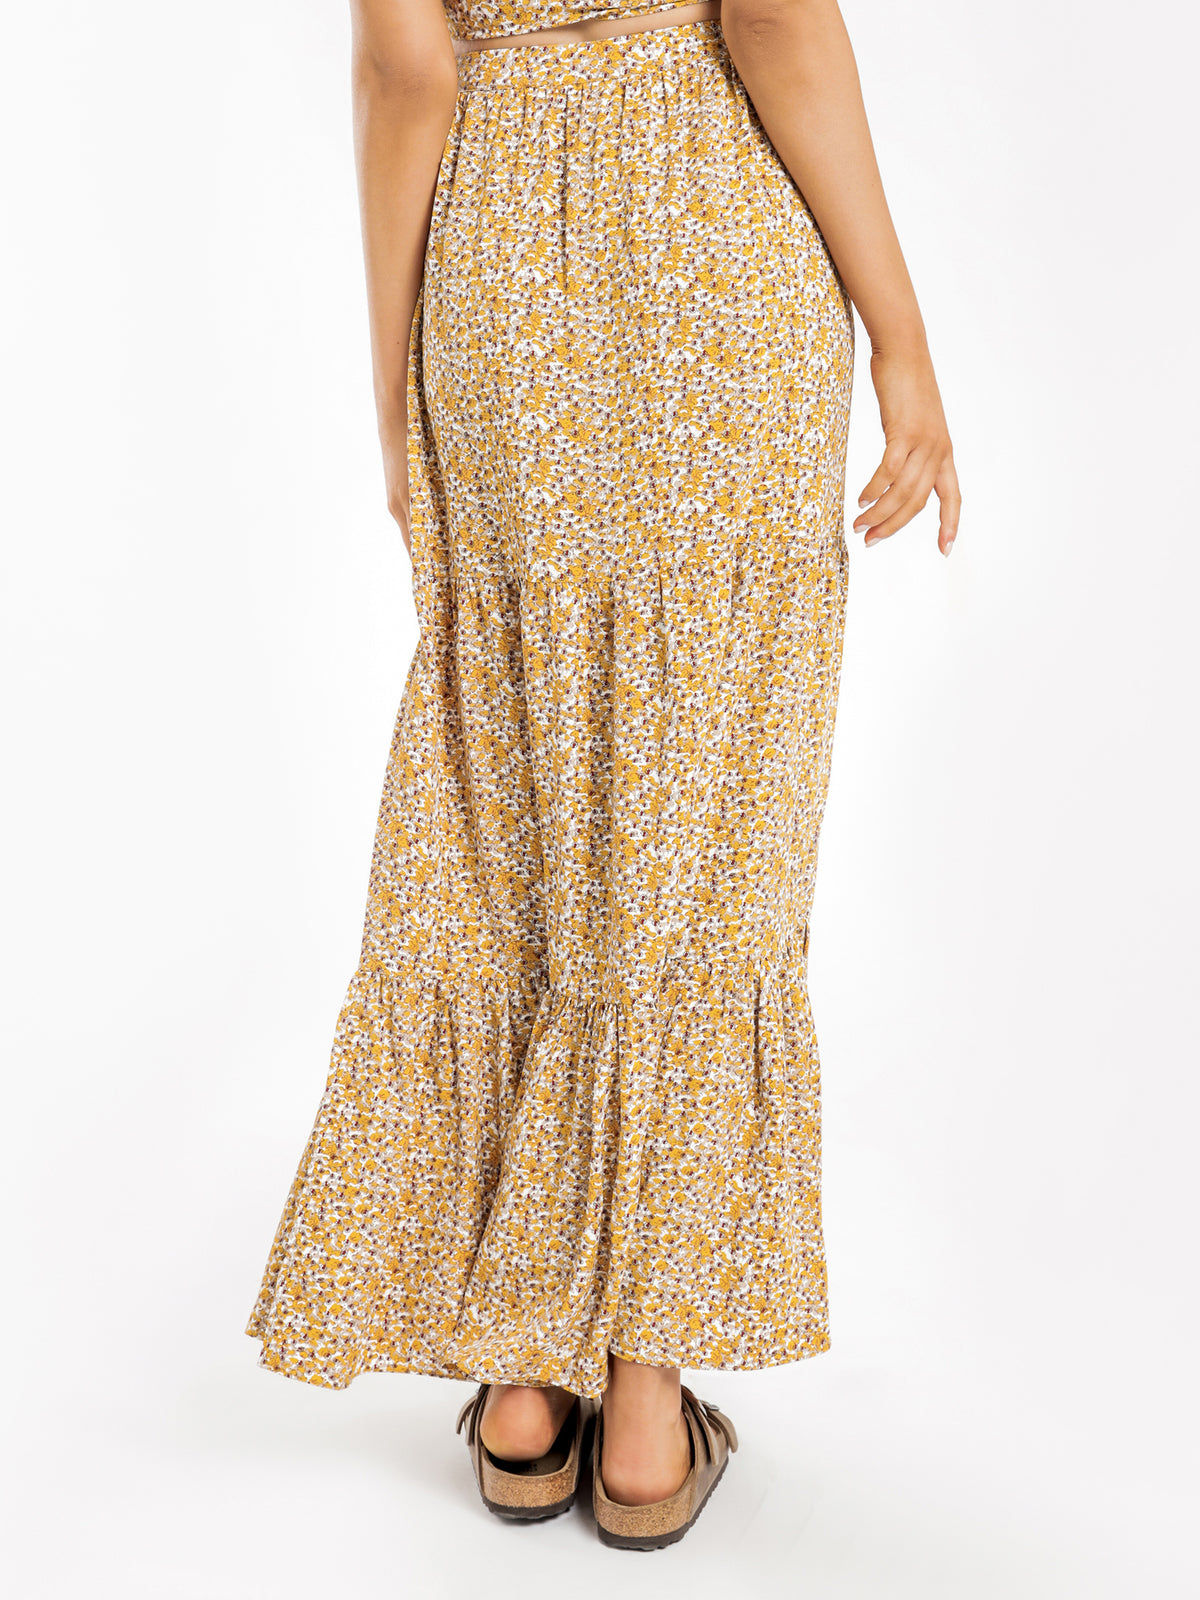 Vienna Tiered Maxi Skirt in Ditsy Floral